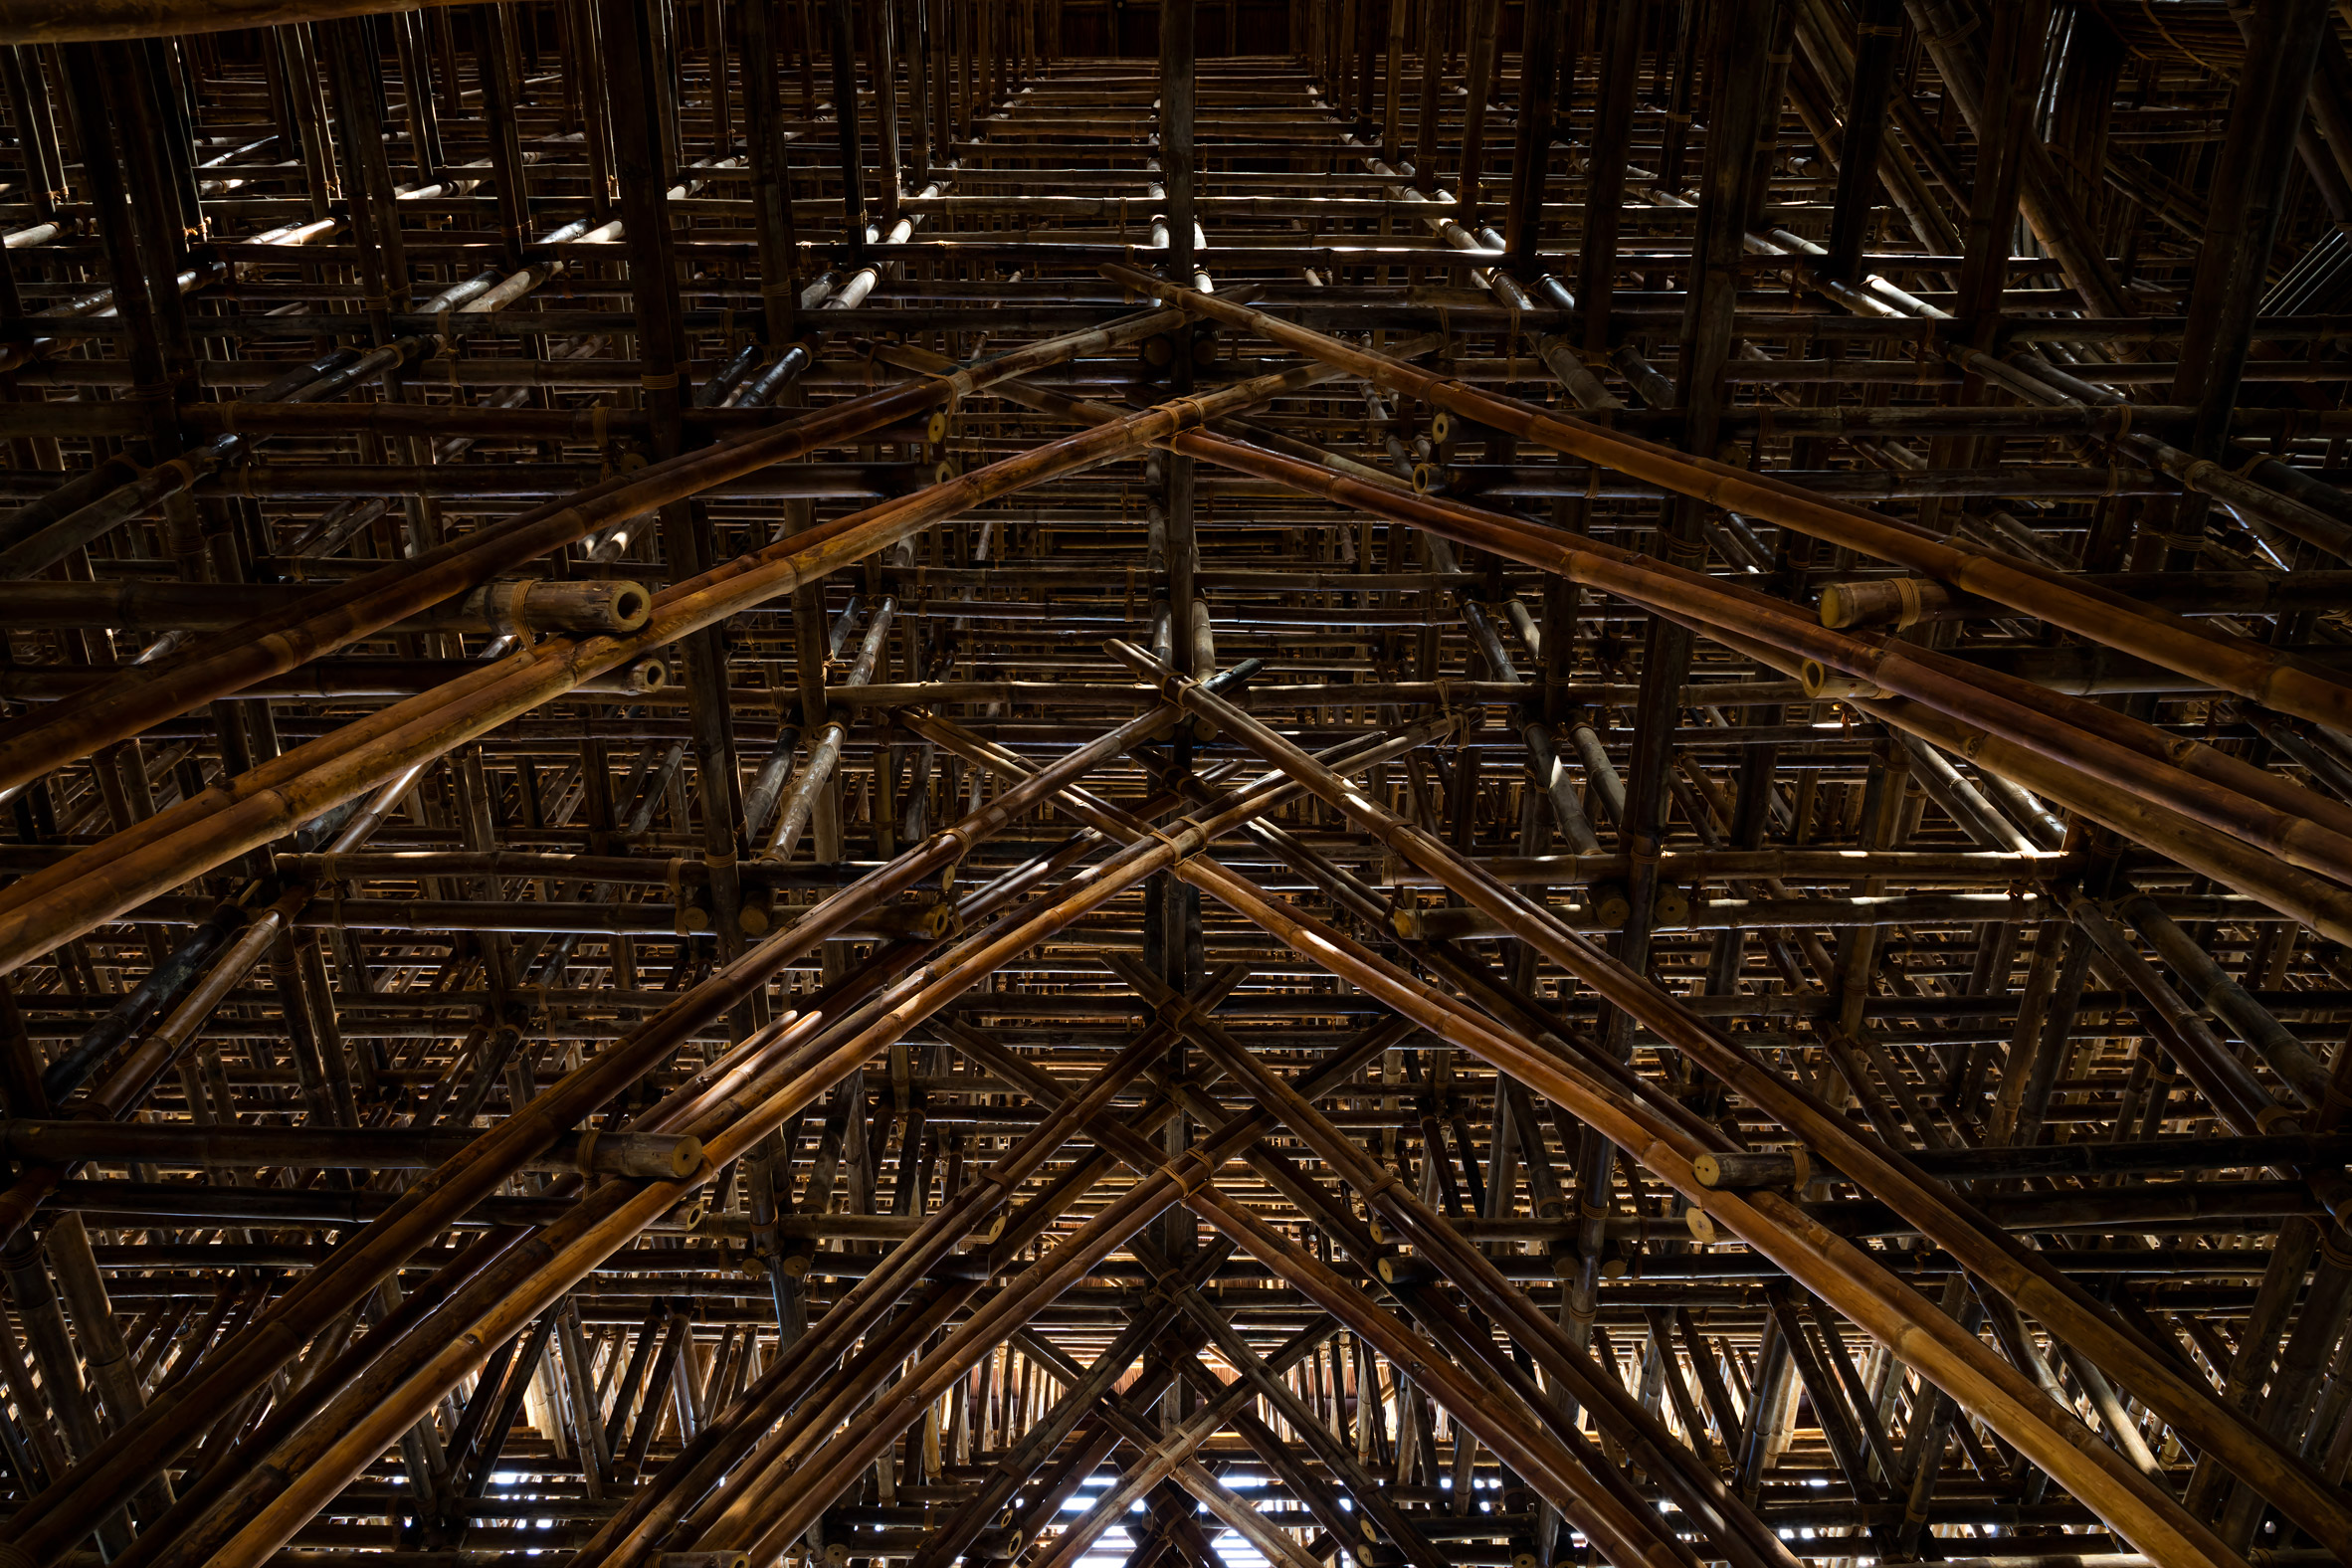 Detail image of the bamboo joints at the structure